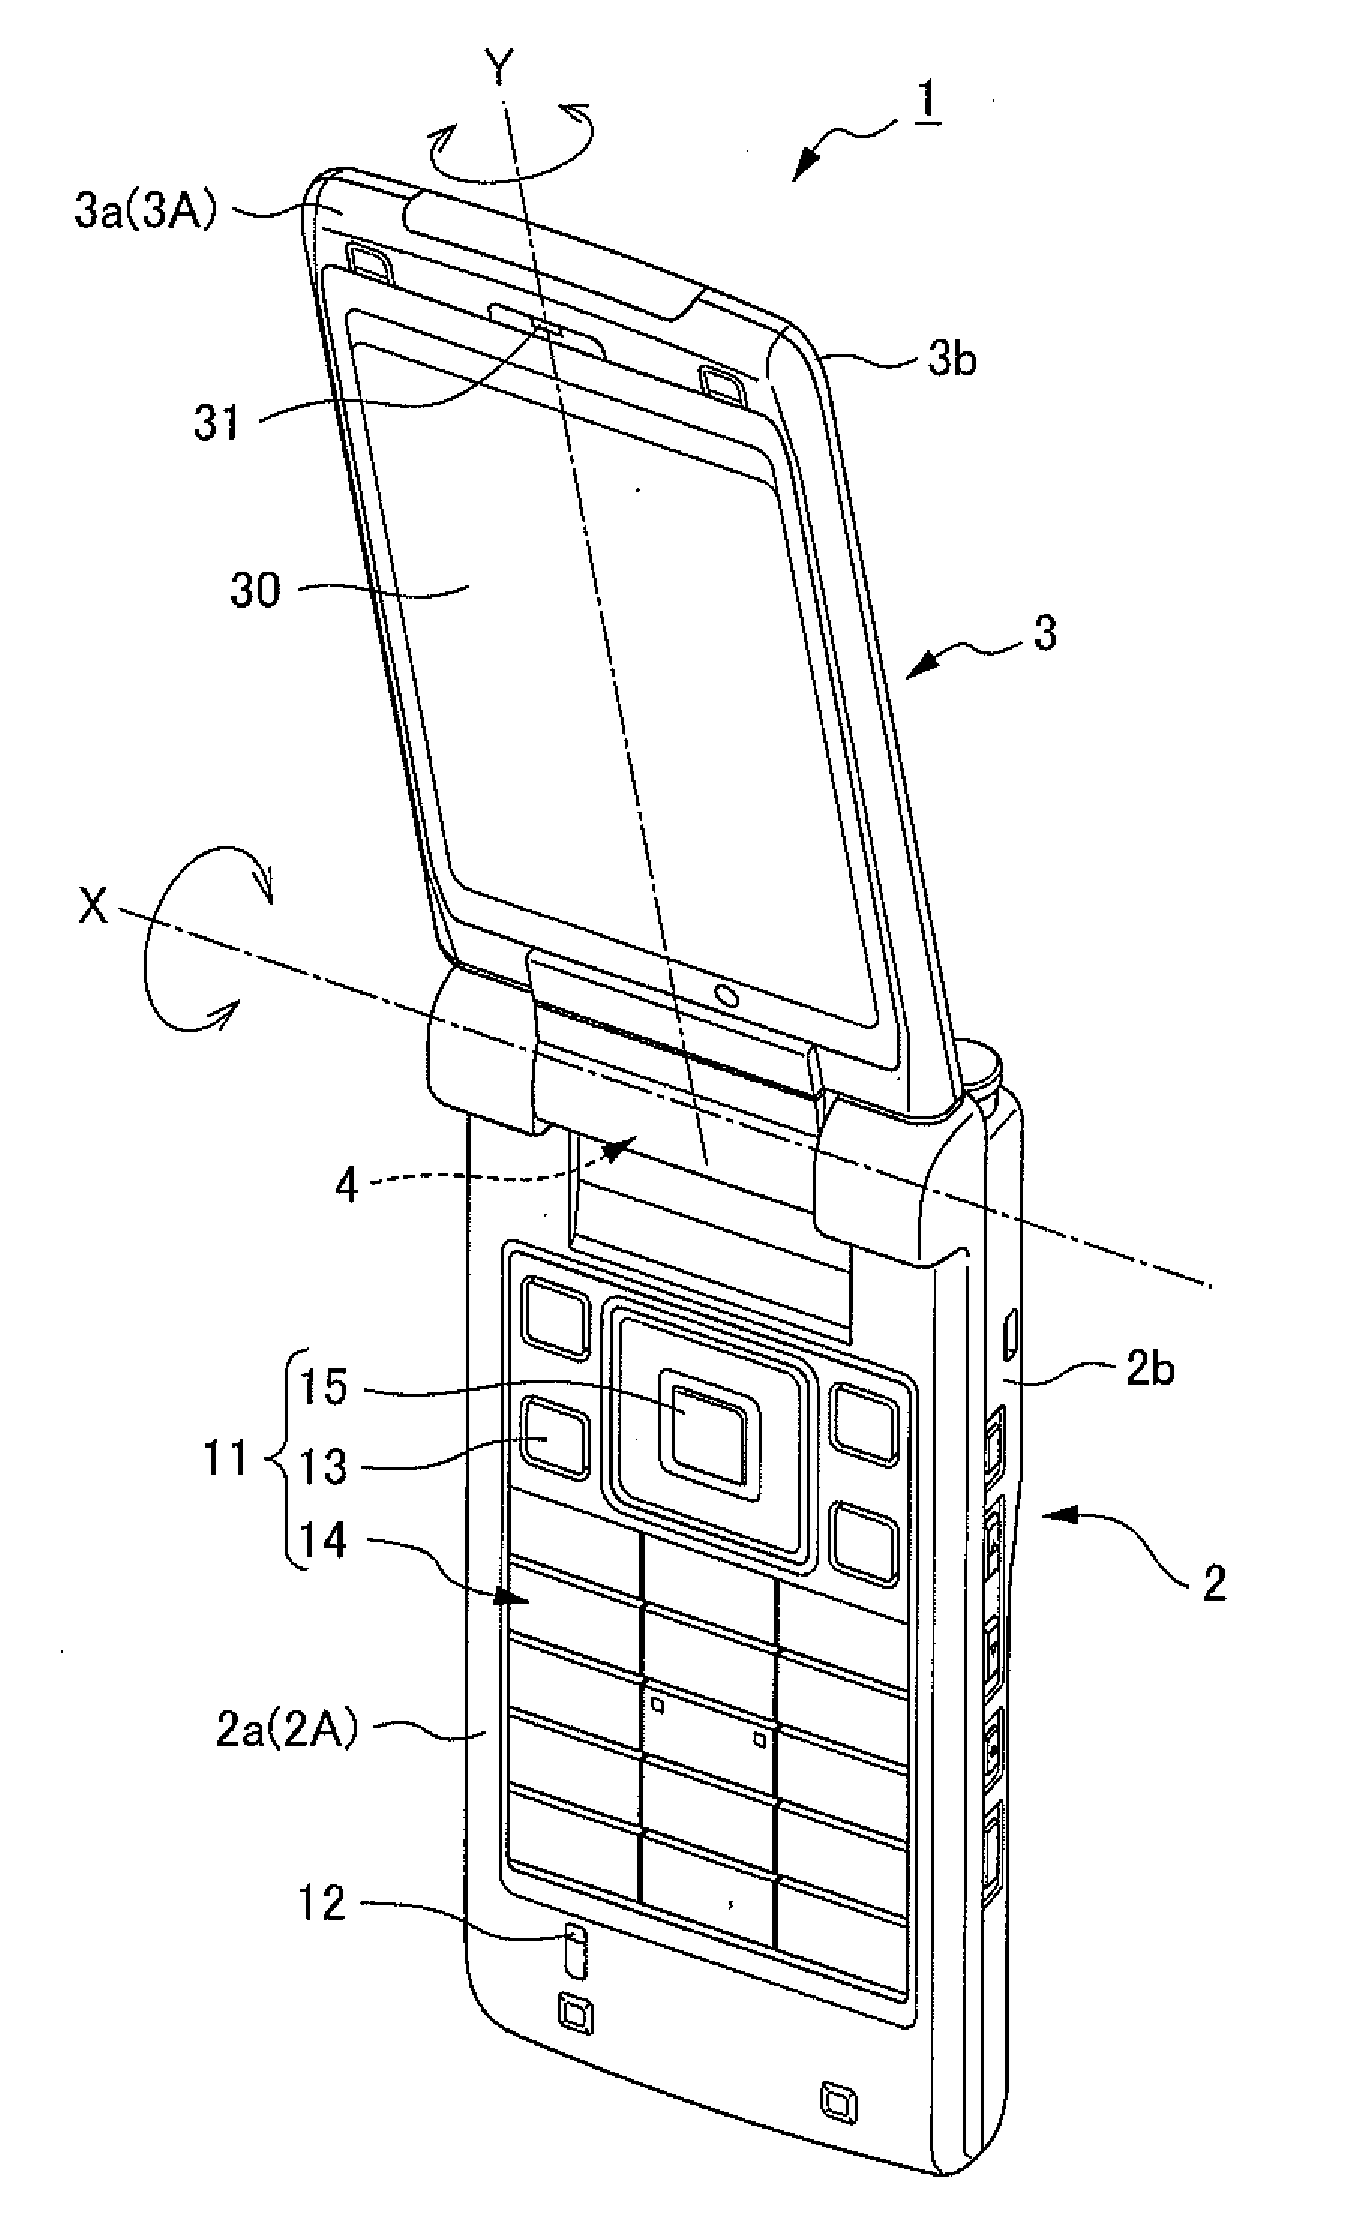 Portable Electronic Device